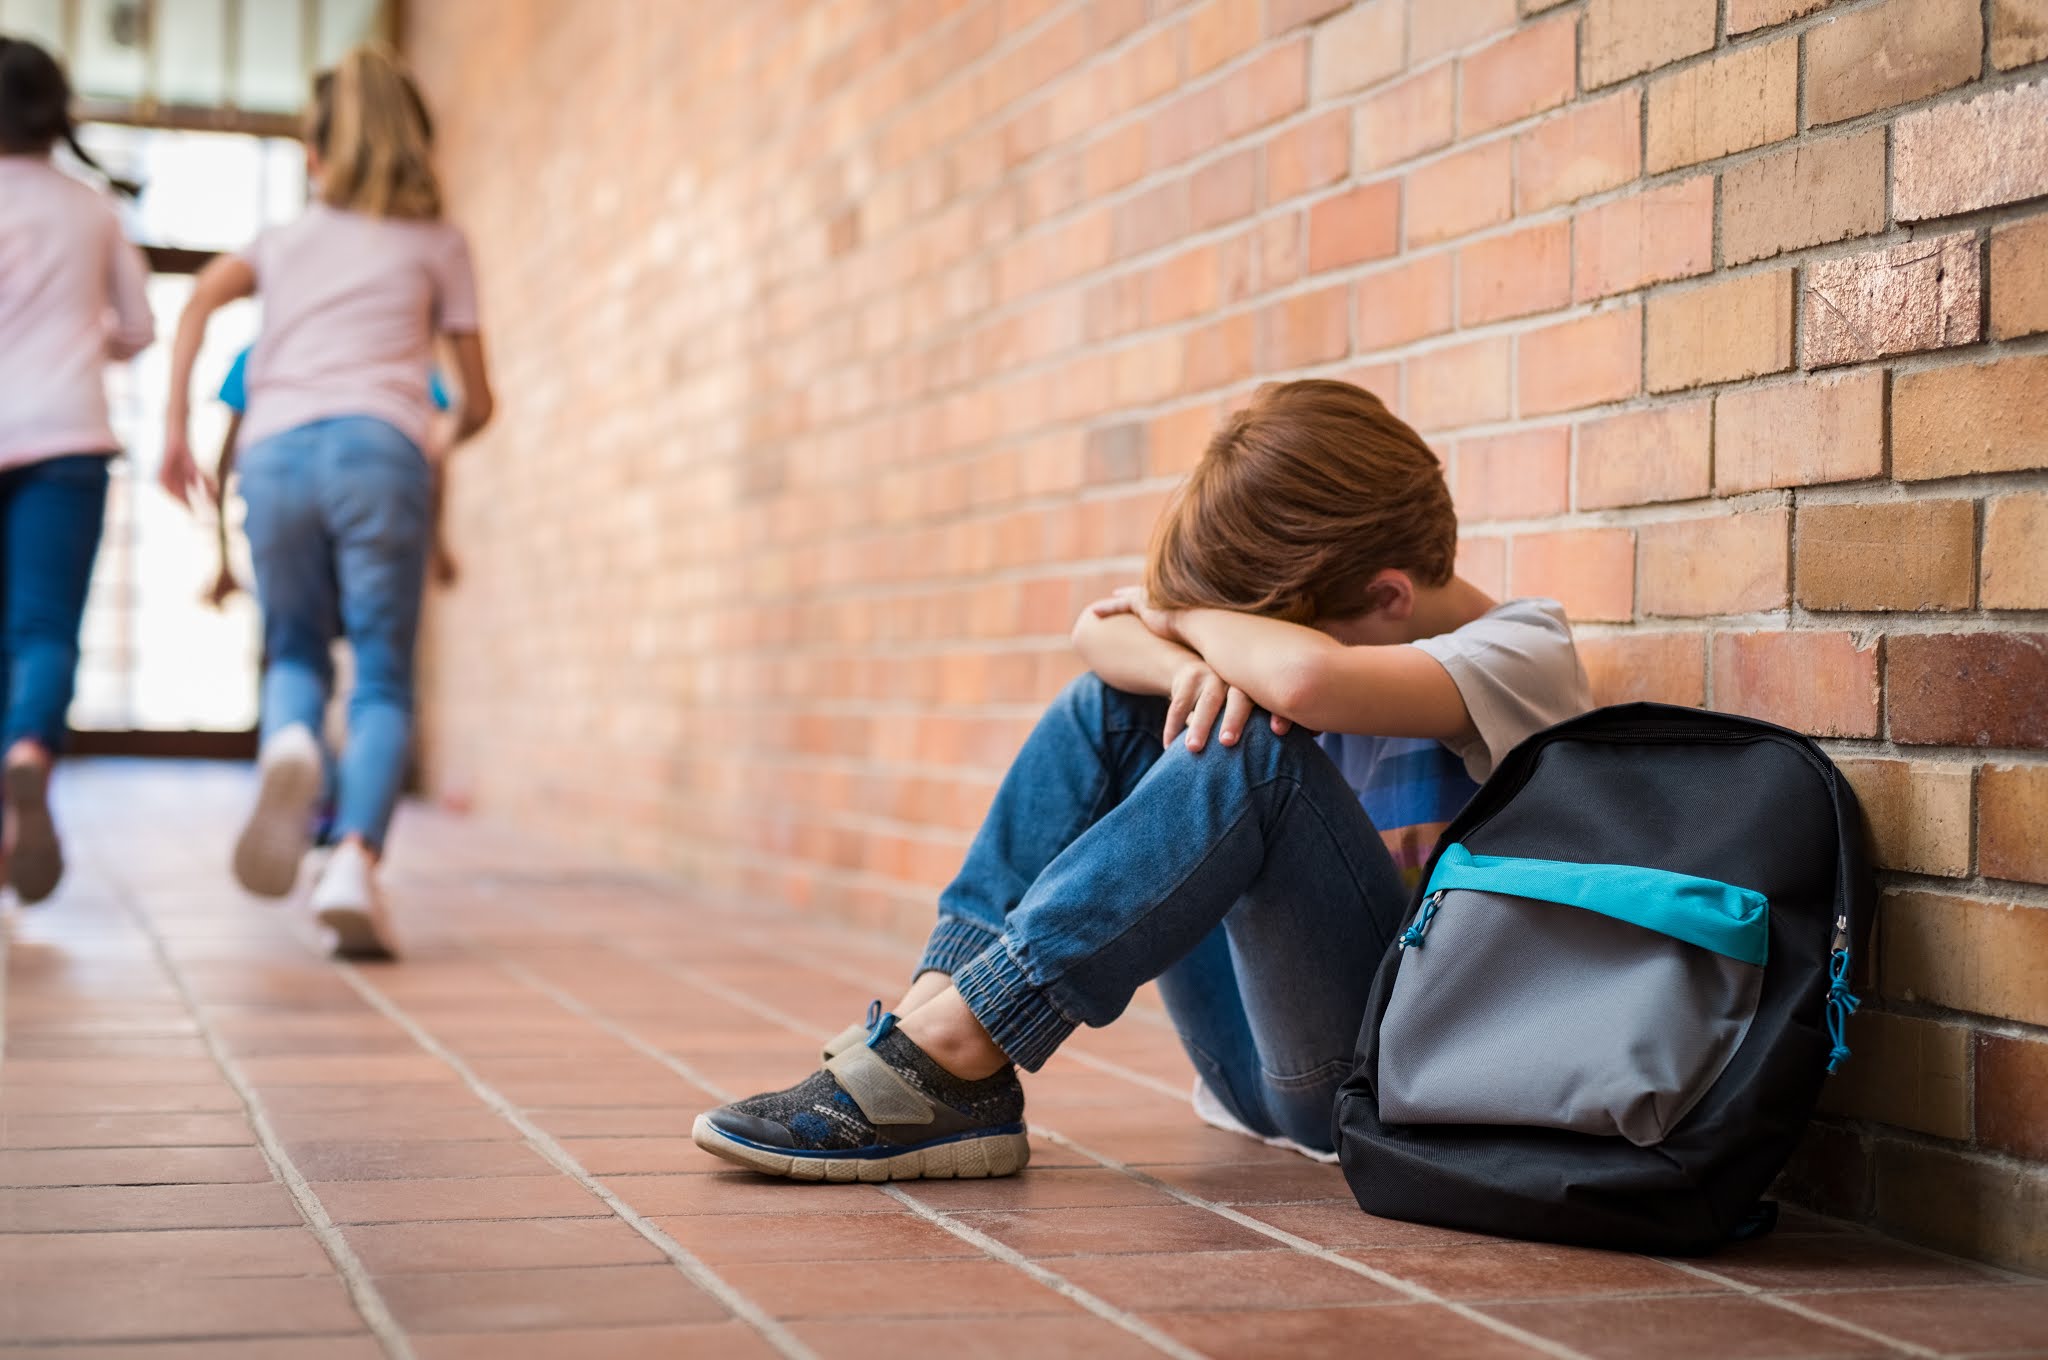 What To Do If You Suspect Your Child Is Being Bullied